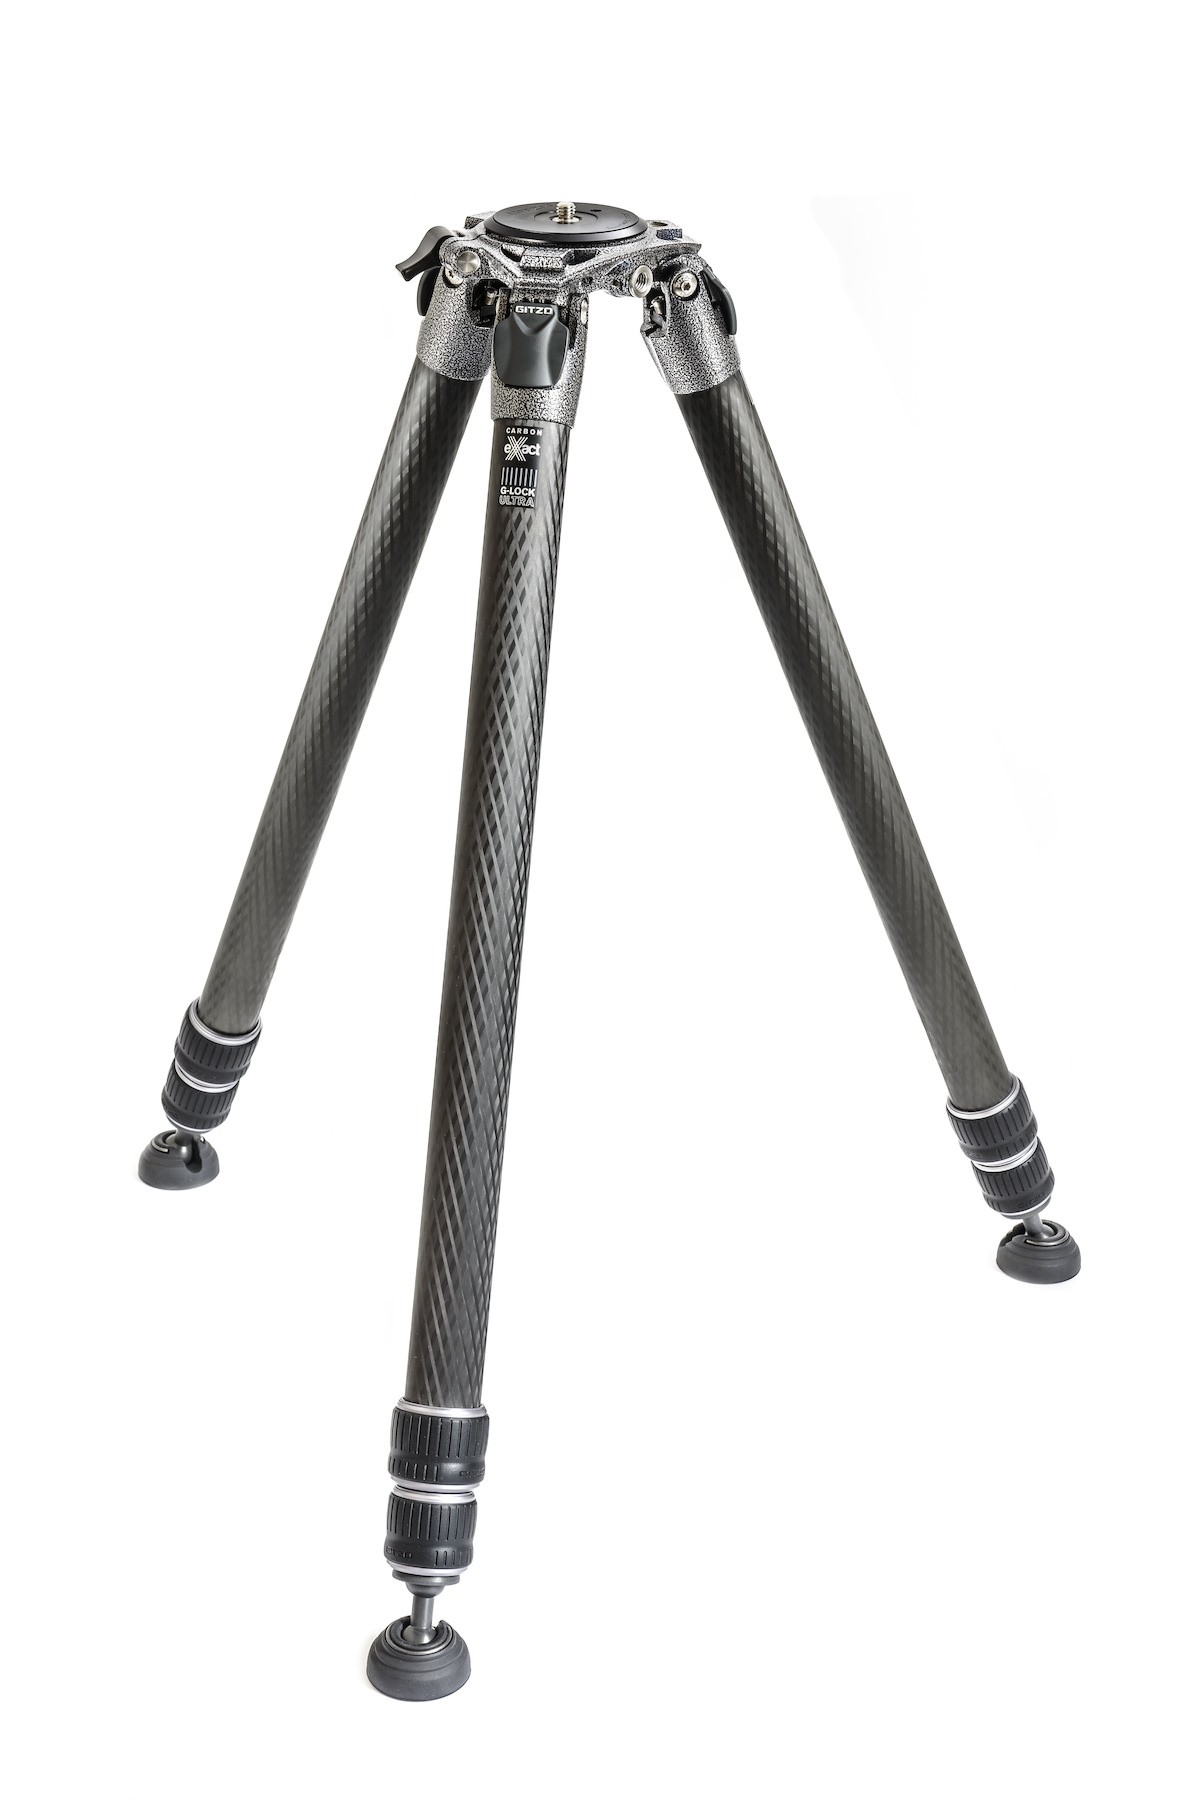 Gitzo tripod Systematic, series 4 long, 3 sections